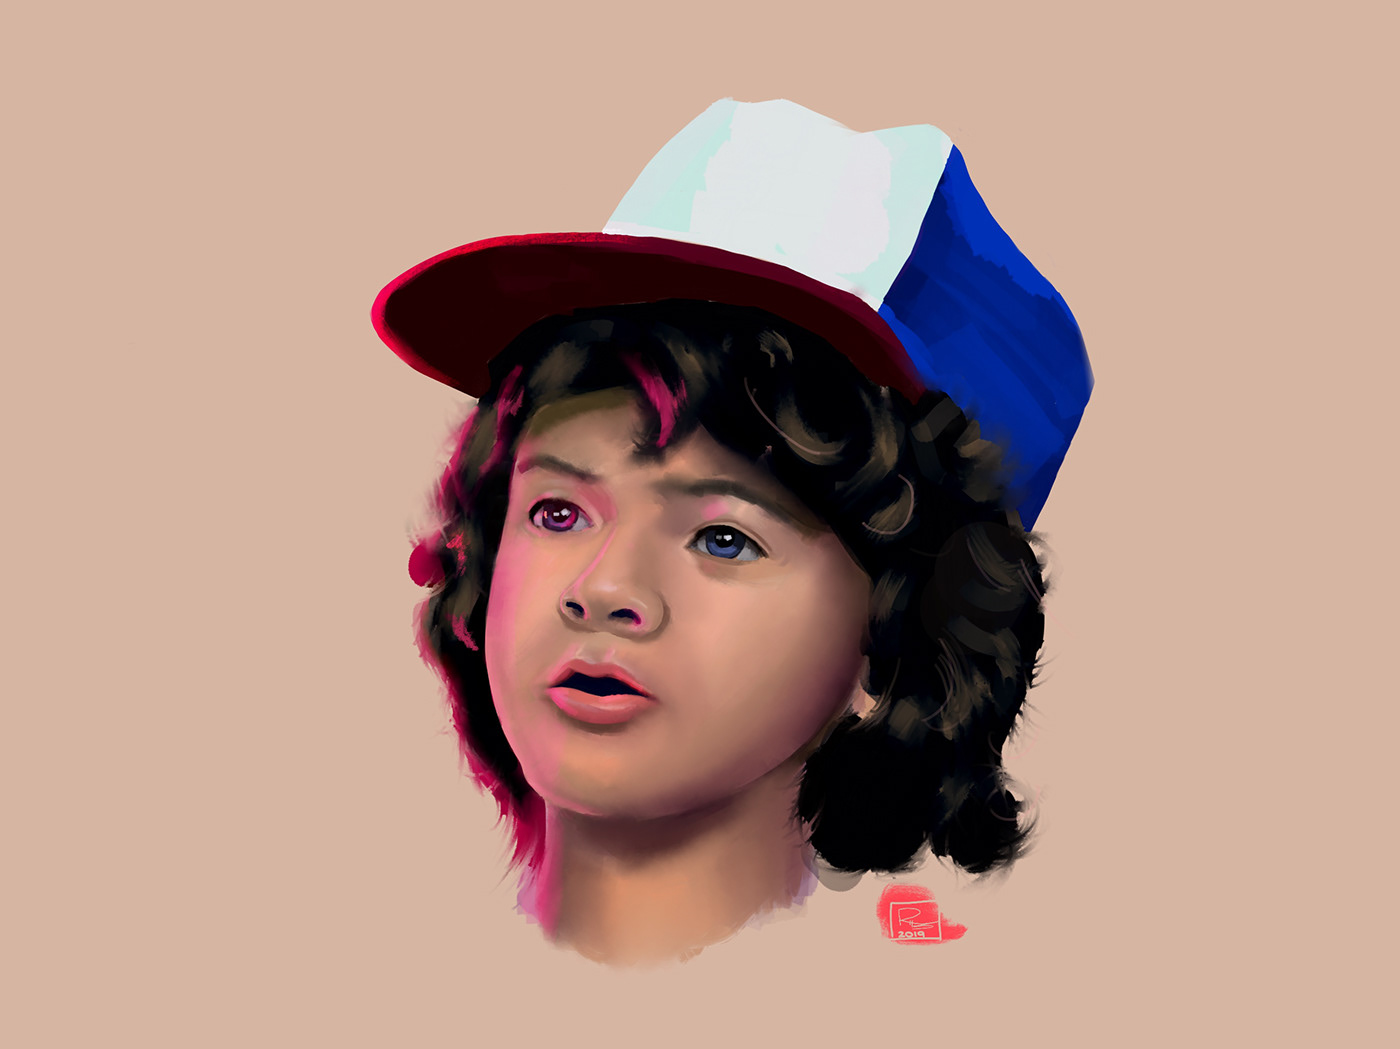 Stranger Things portrait Paintings Netflix eleven dustin mike will